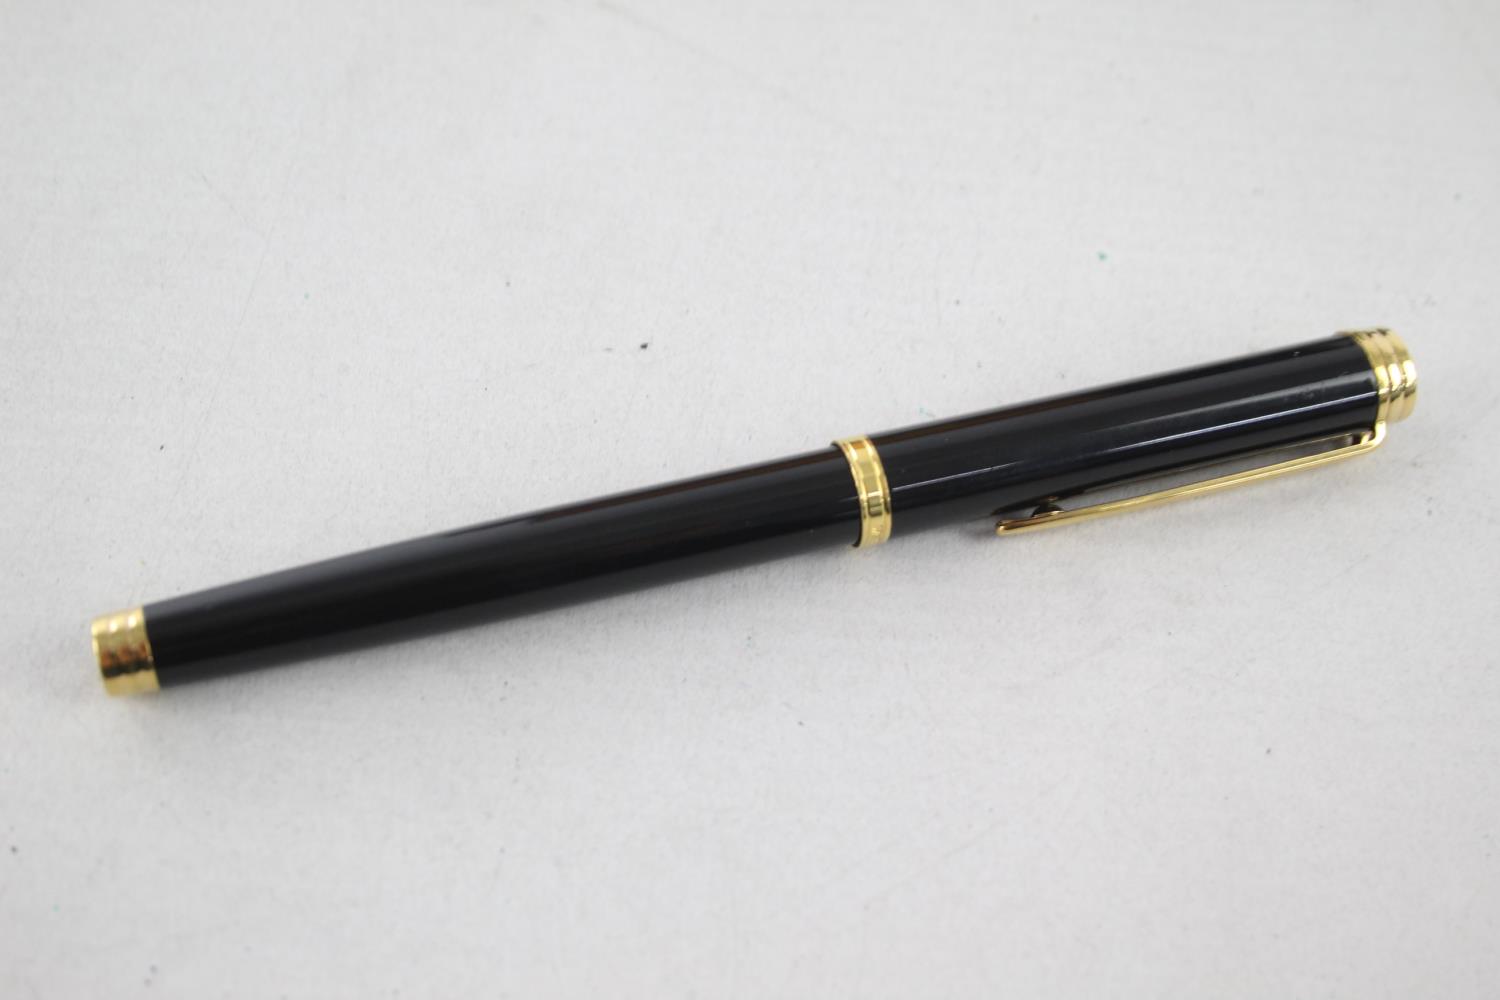 WATERMAN Ideal Black Lacquer FOUNTAIN PEN w/ 18ct Gold Nib WRITING Boxed WATERMAN Ideal Black - Image 5 of 8